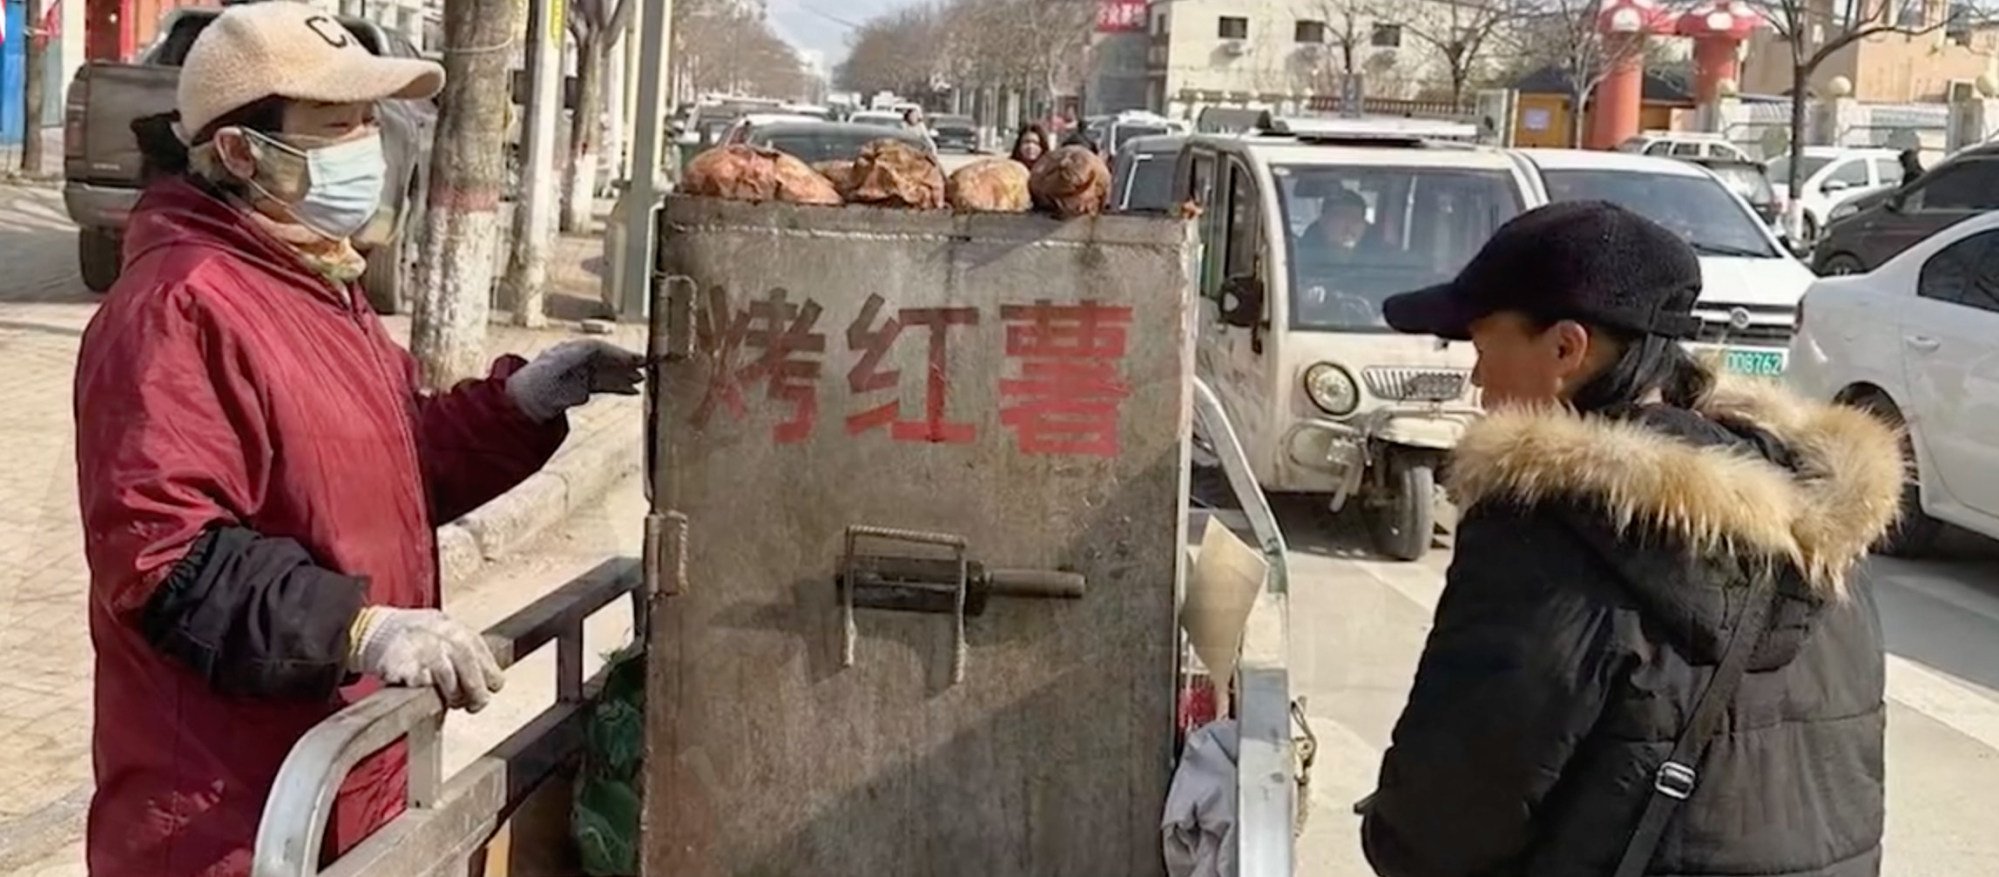 Zhang’s mother lived a frugal life and sold street food so that her daughters could have a better life. Photo: Weibo